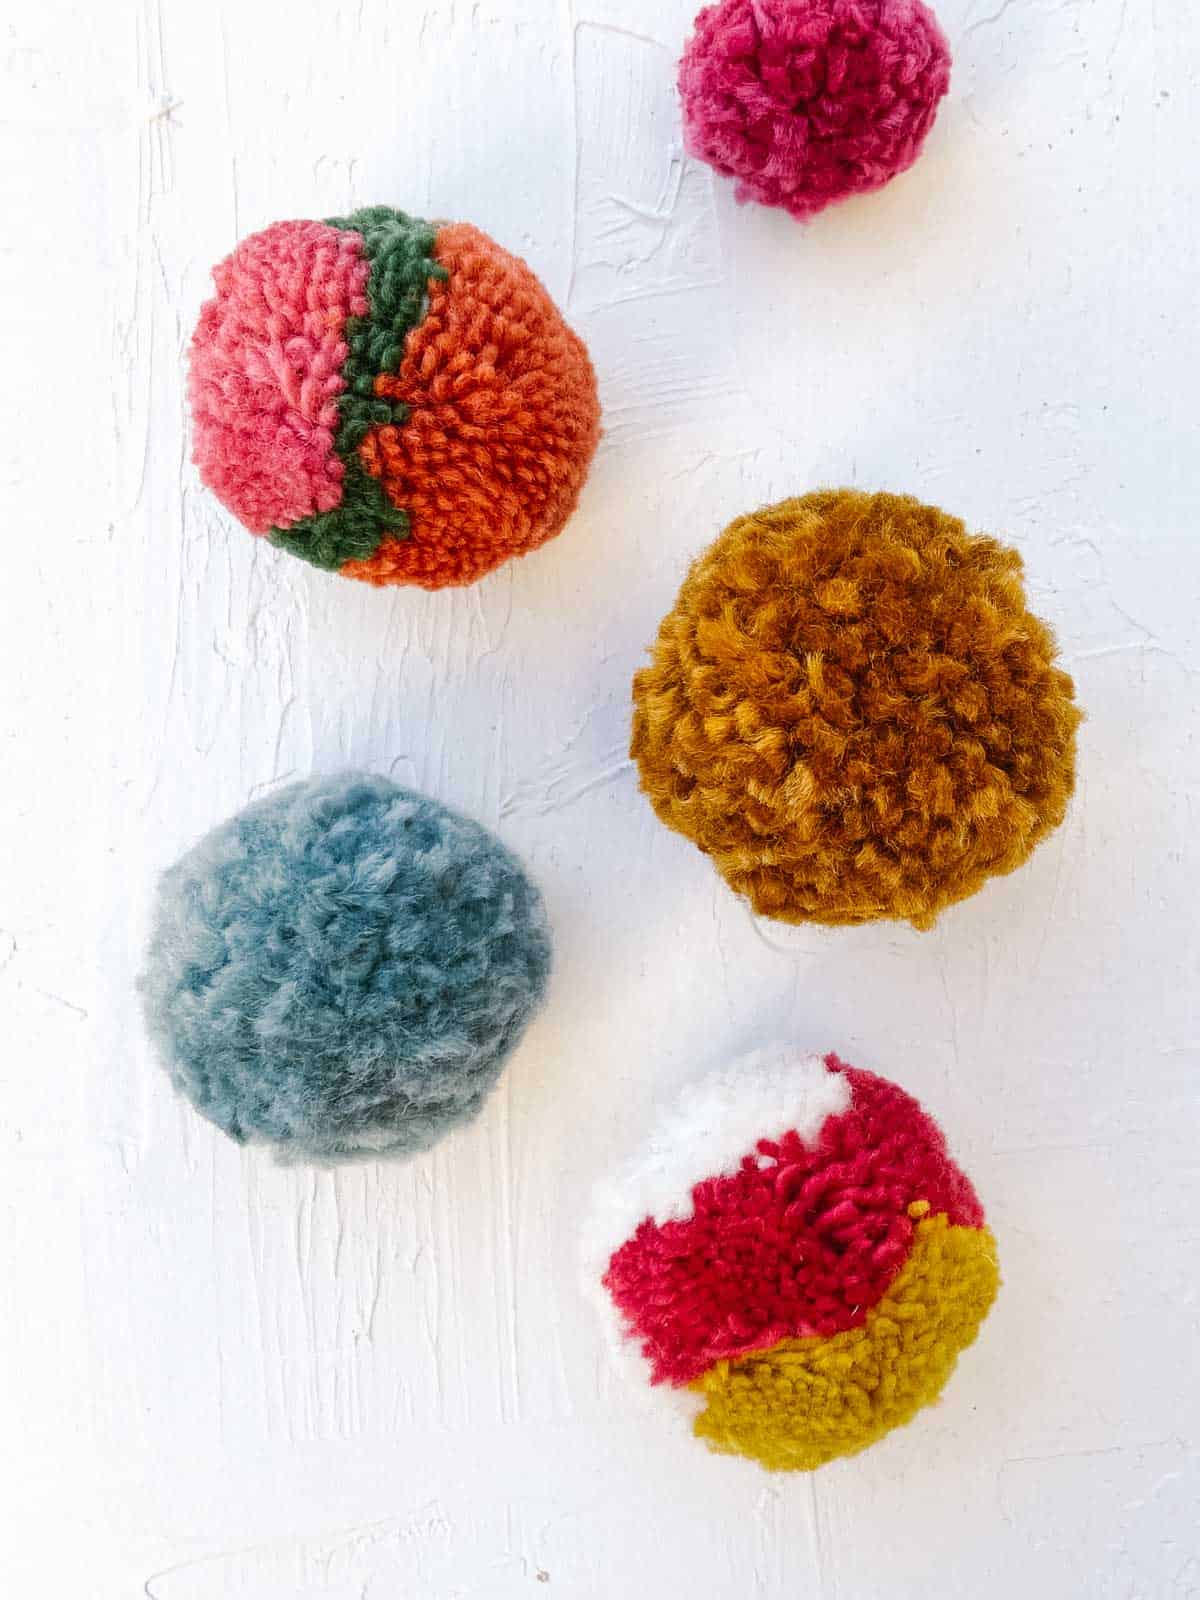 Multi-color pom poms in different sizes on a white plaster background.